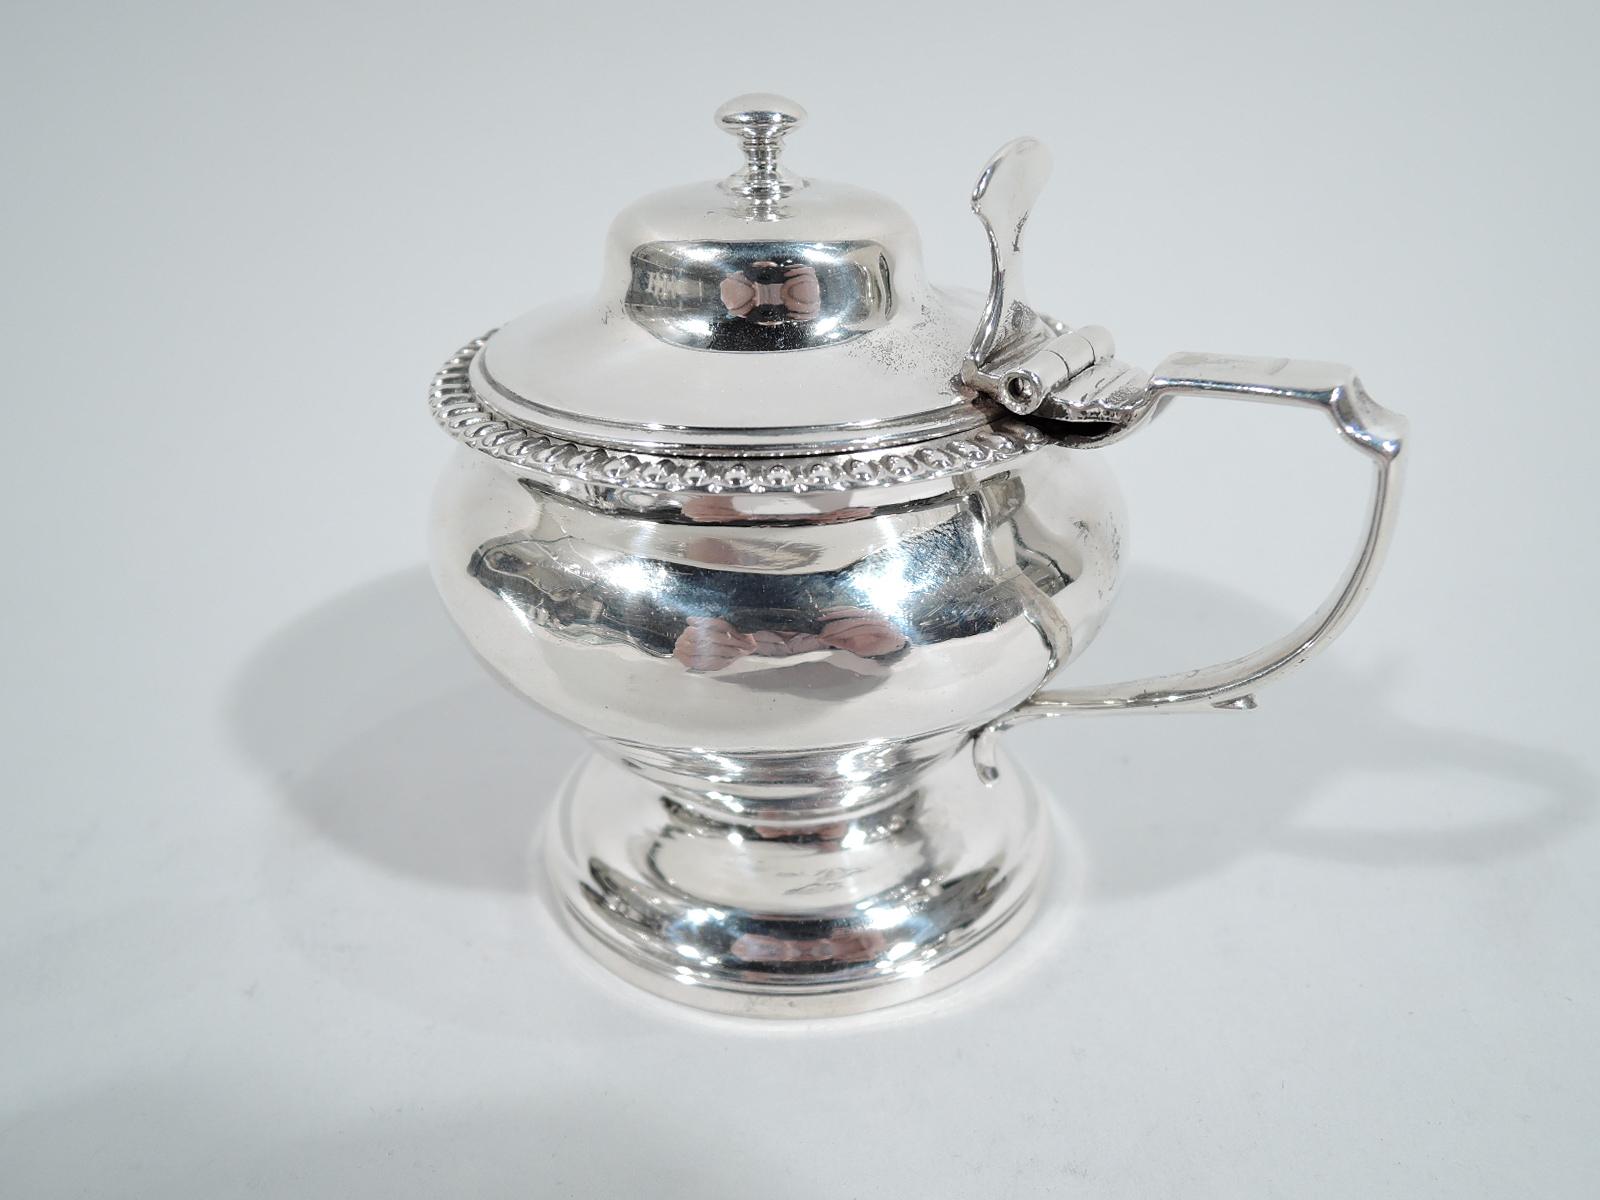 George IV sterling silver mustard pot. Made by Thomas Jenkinson in London in 1824. Bellied bowl with egg-and-dart border on raised foot. Scroll bracket handle and hinged and domed cover with finial. Fully marked. Weight: 4 troy ounces.